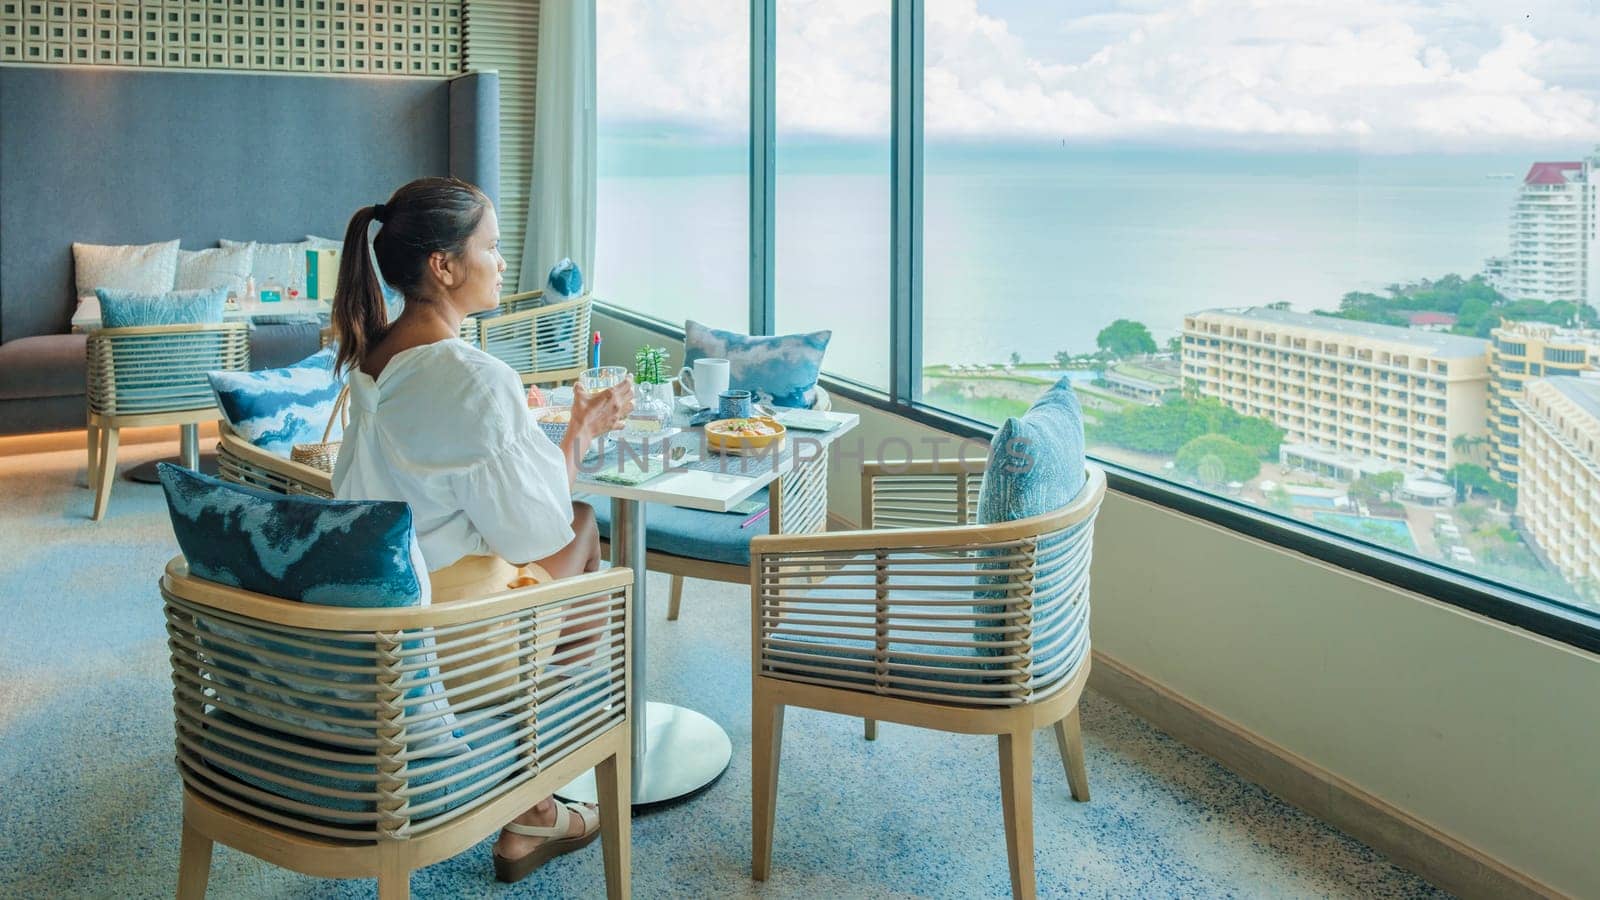 Asian Thai woman eating breakfast in a luxury hotel in Thailand, women drinking coffee looking out the window over the city and ocean